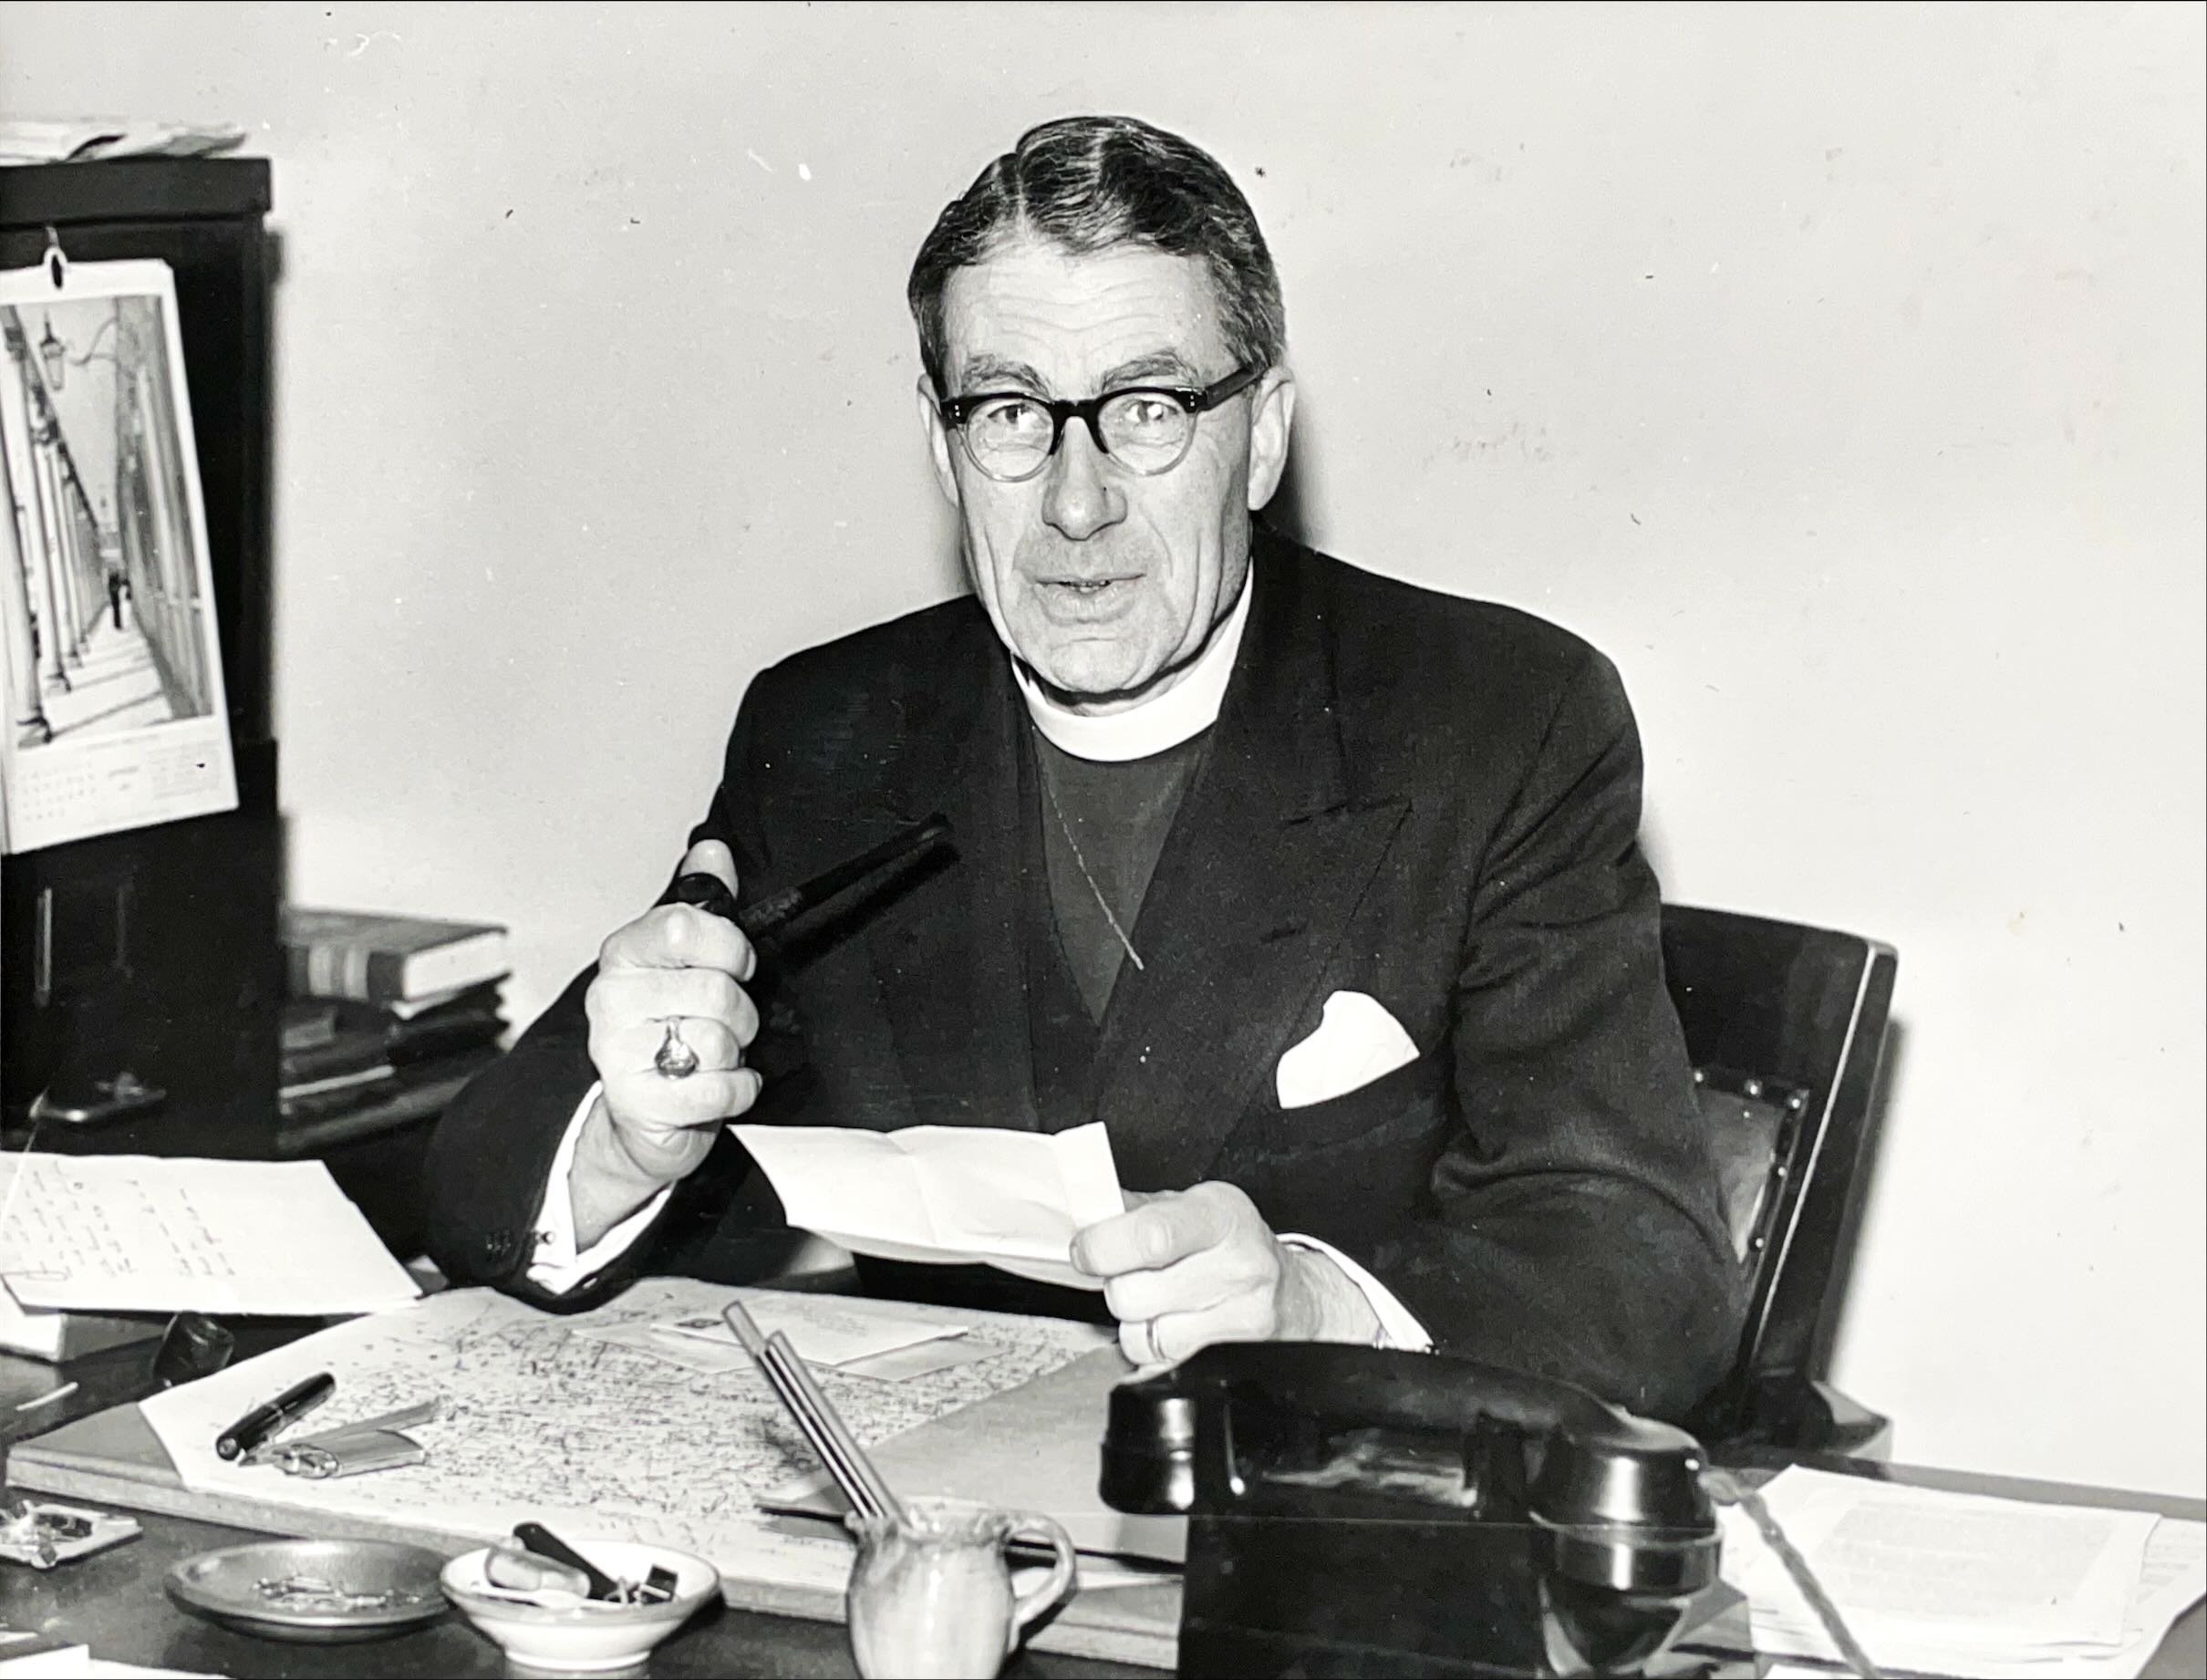 The Rt. Rev. R. W. Stannard appointed dean, January 1959